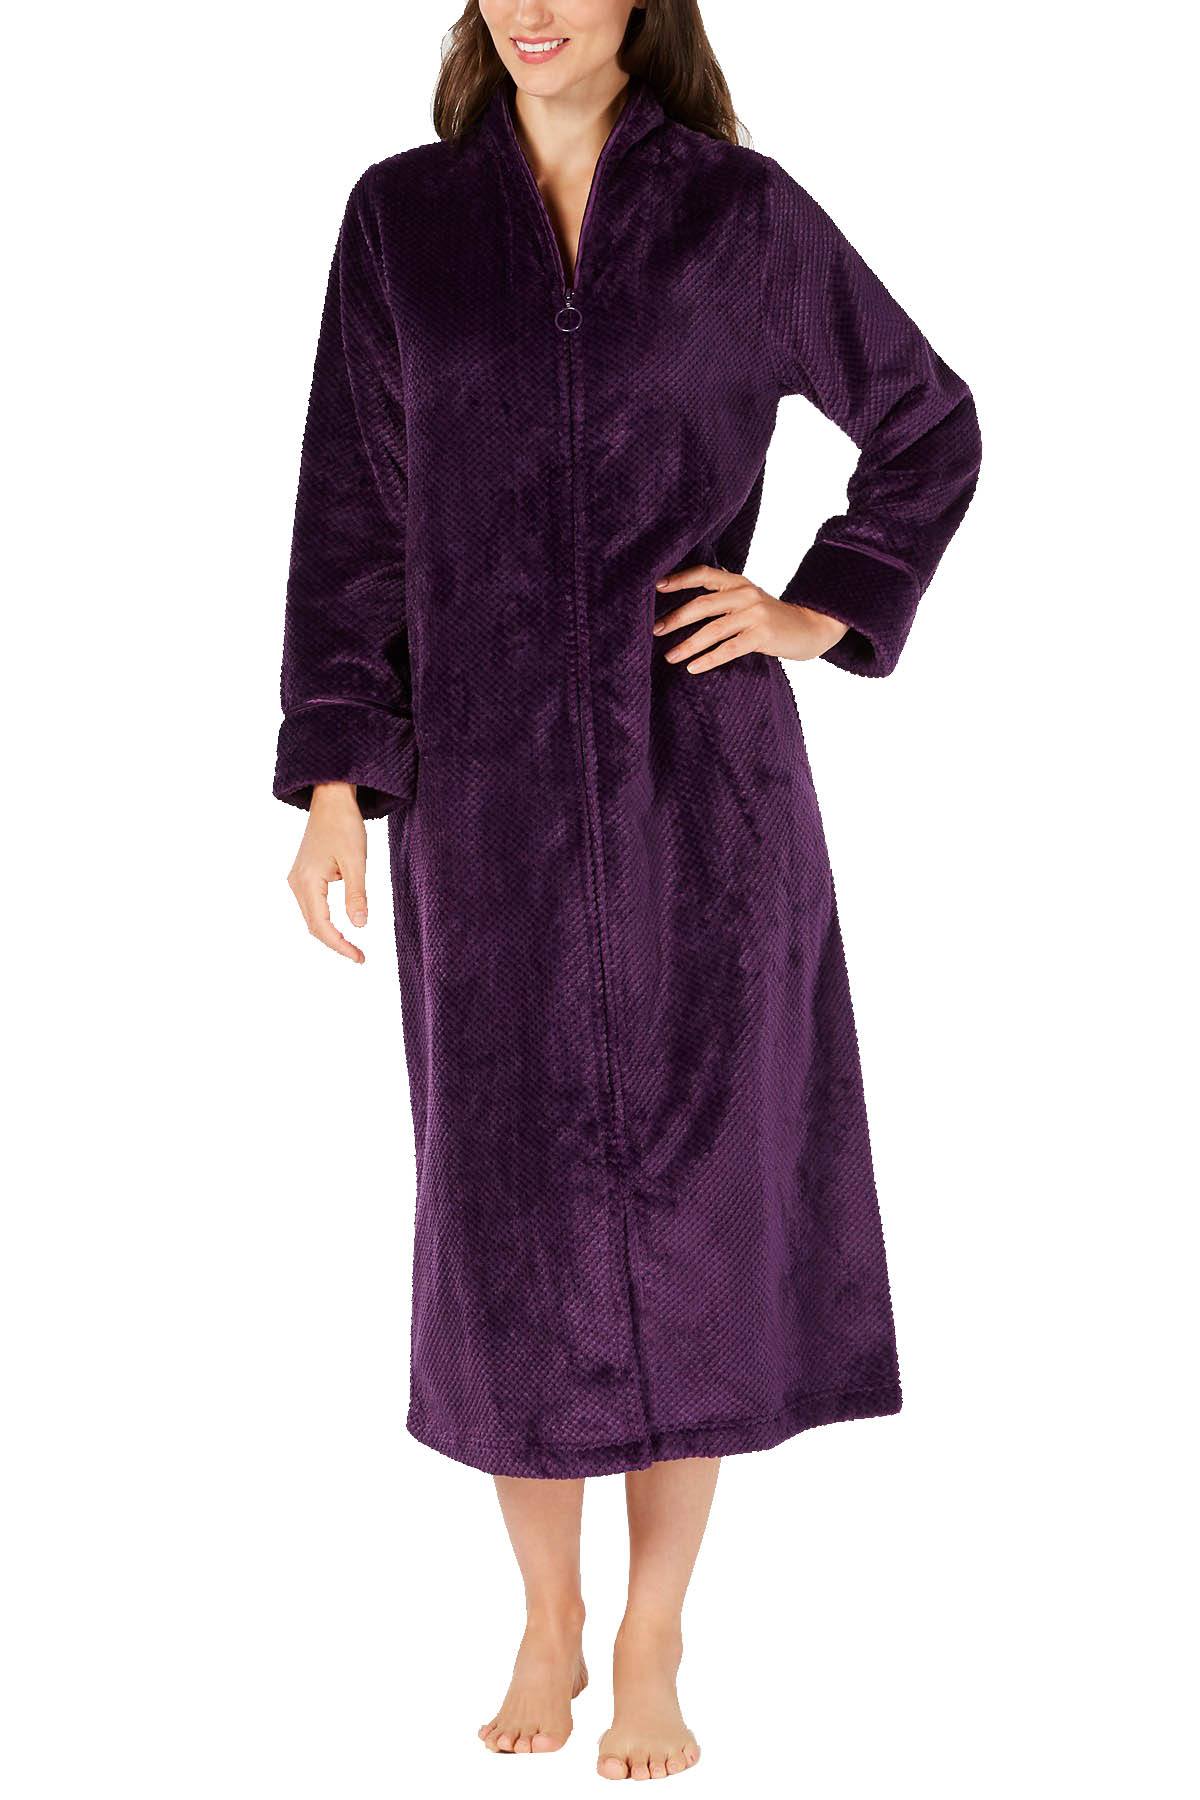 Charter Club Intimates Rich-Concord Dimple Textured Long Zip Robe